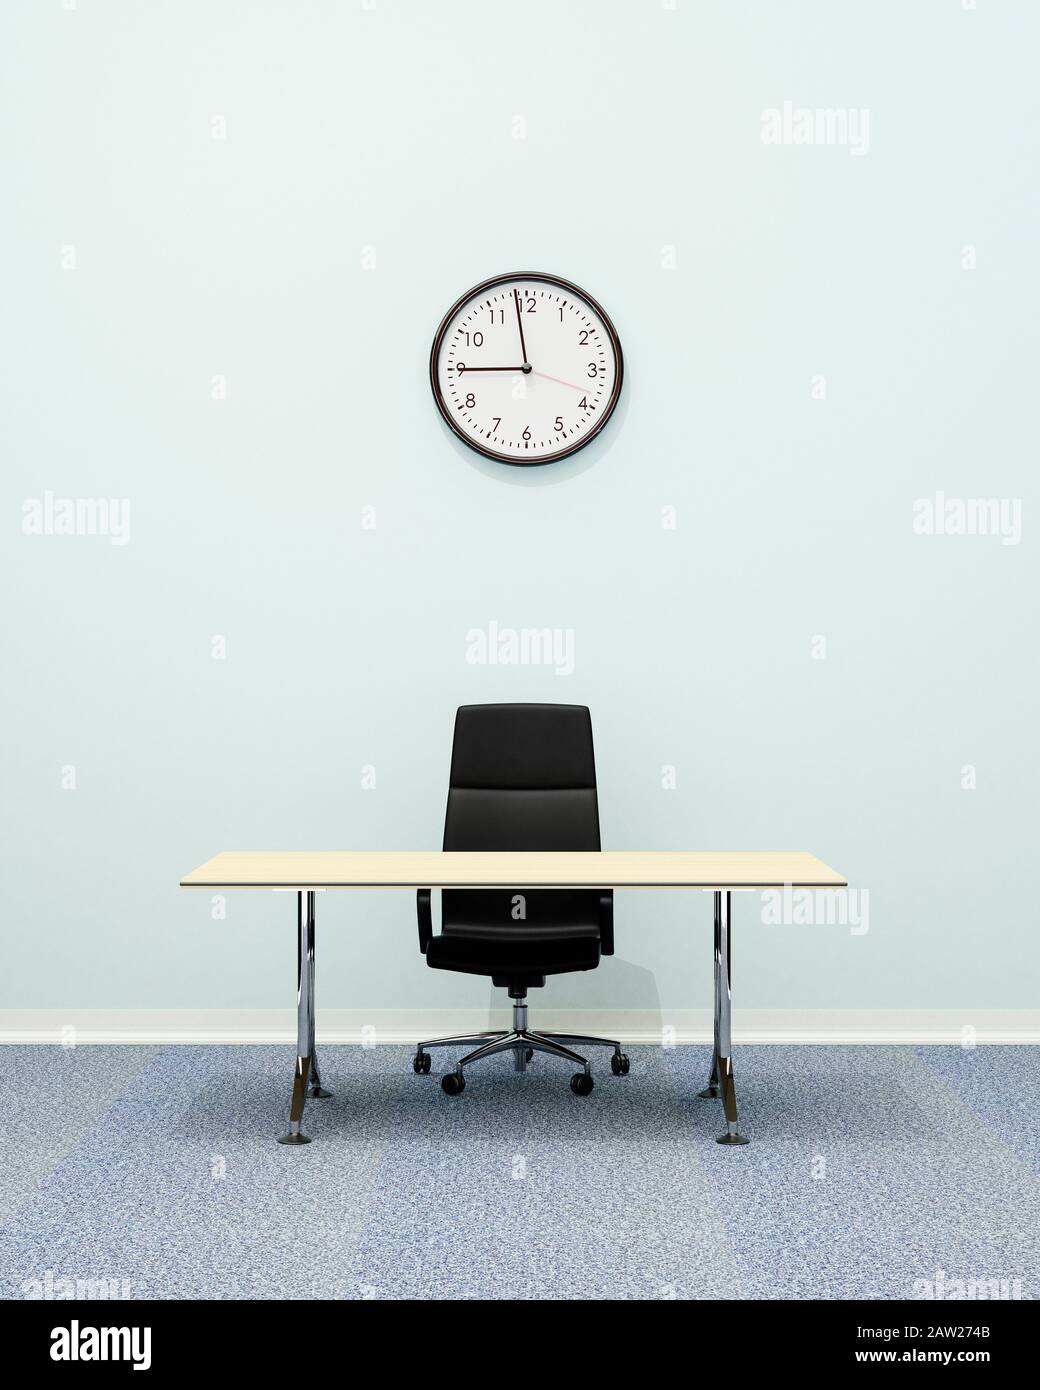 Office interior, an executive leather office chair and empty office desk with a wall clock showing 9am Stock Photo